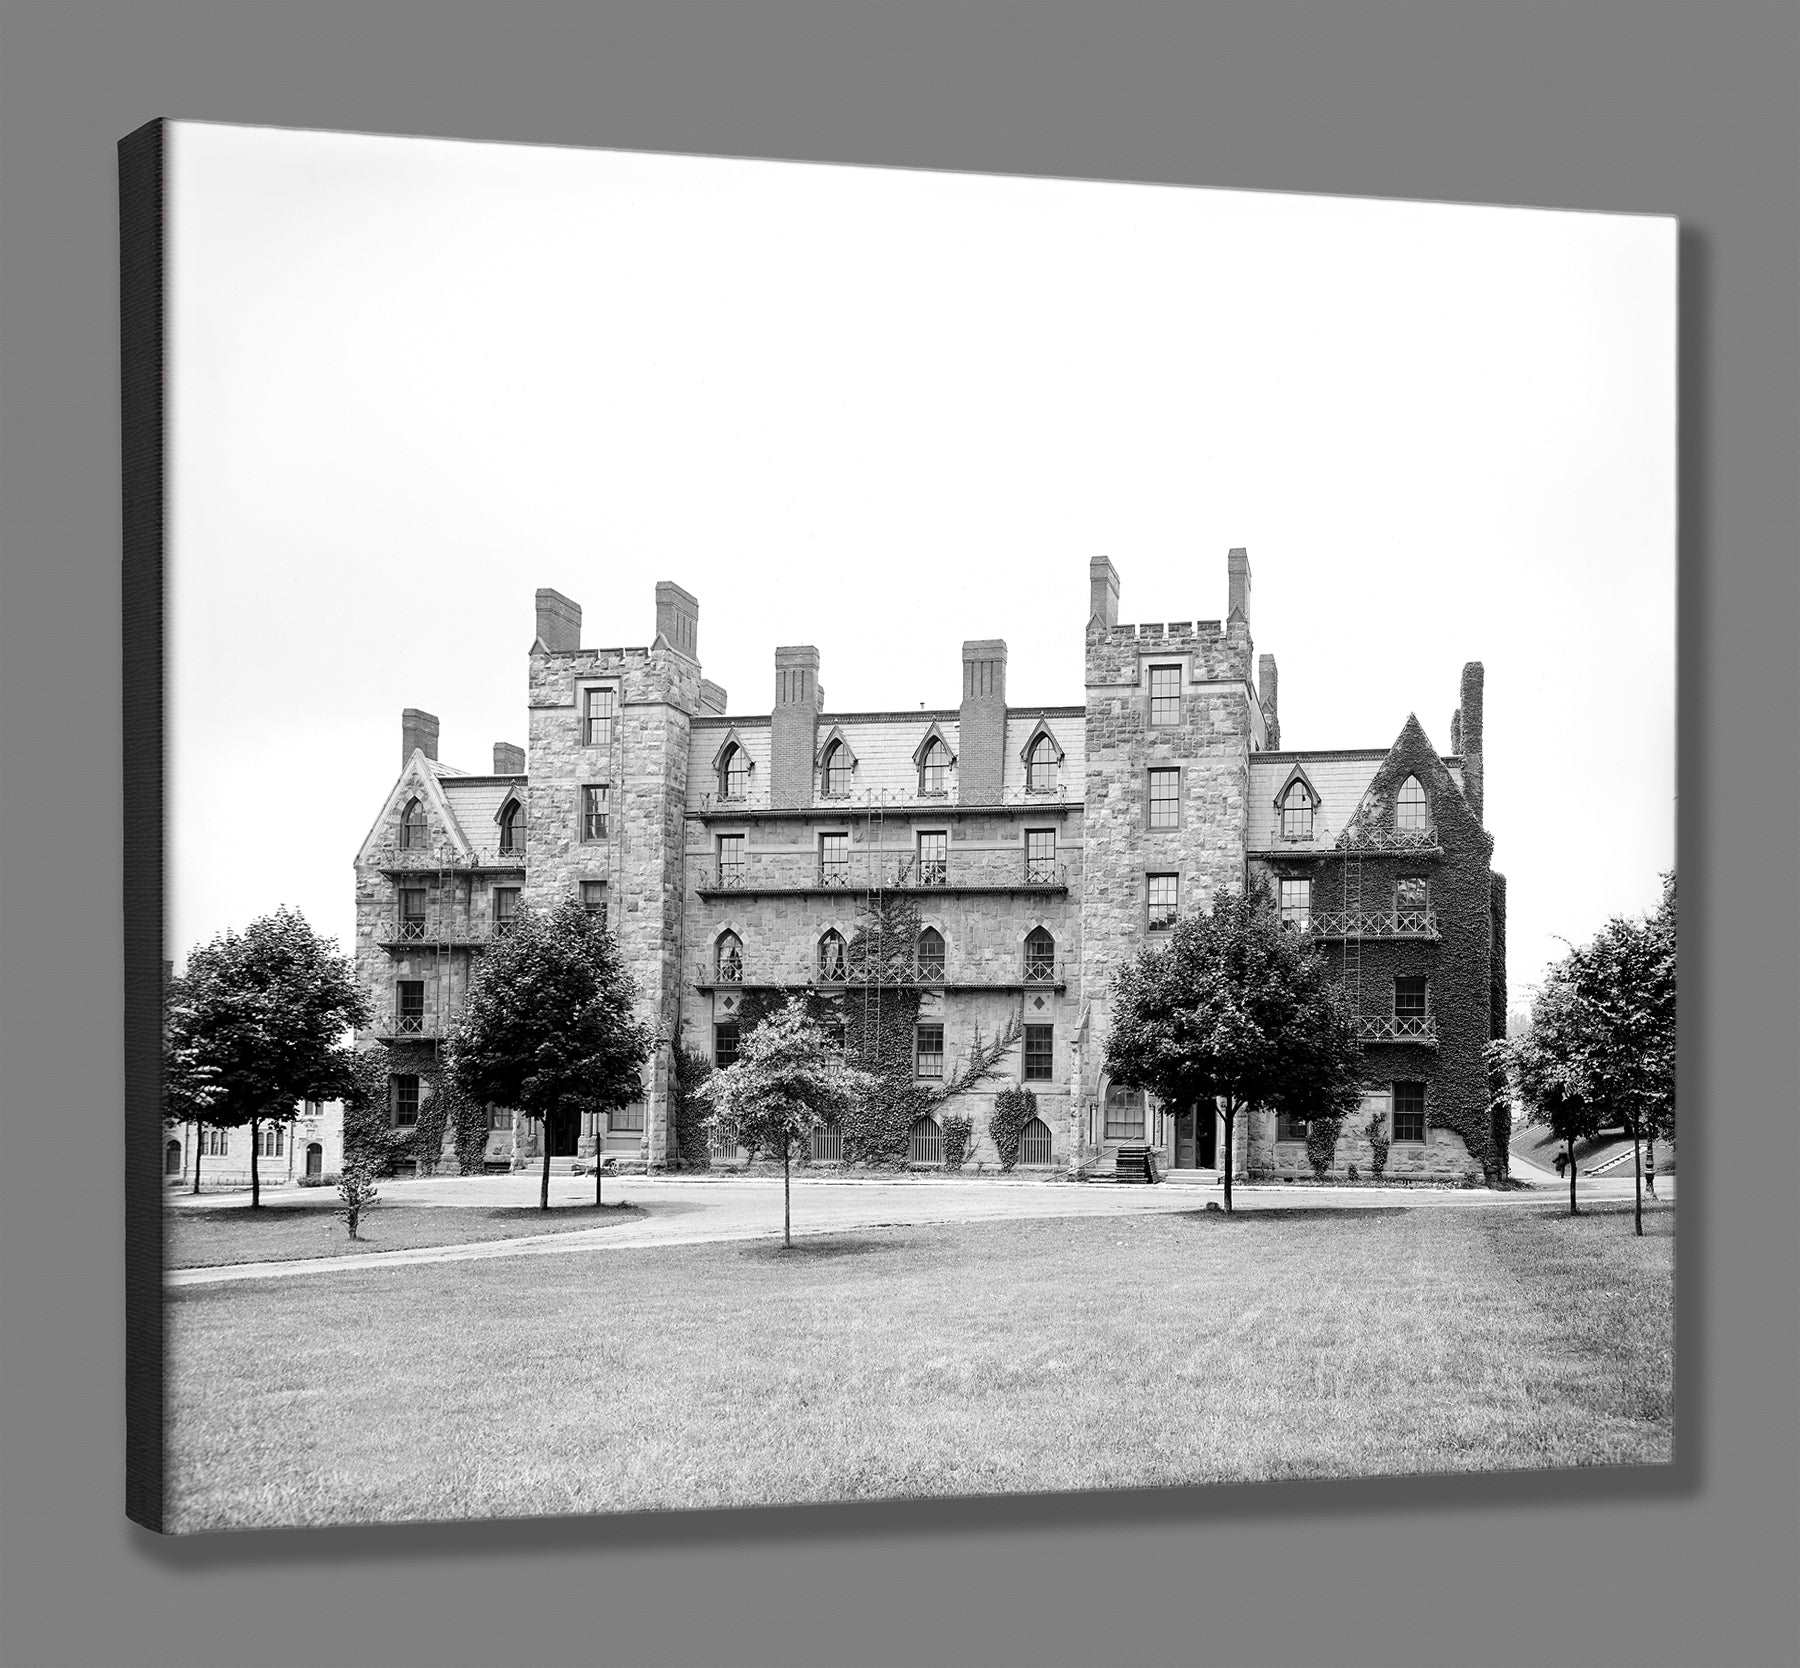 A canvas print reproduction of a vintage photo of Edwards Hall at Princeton